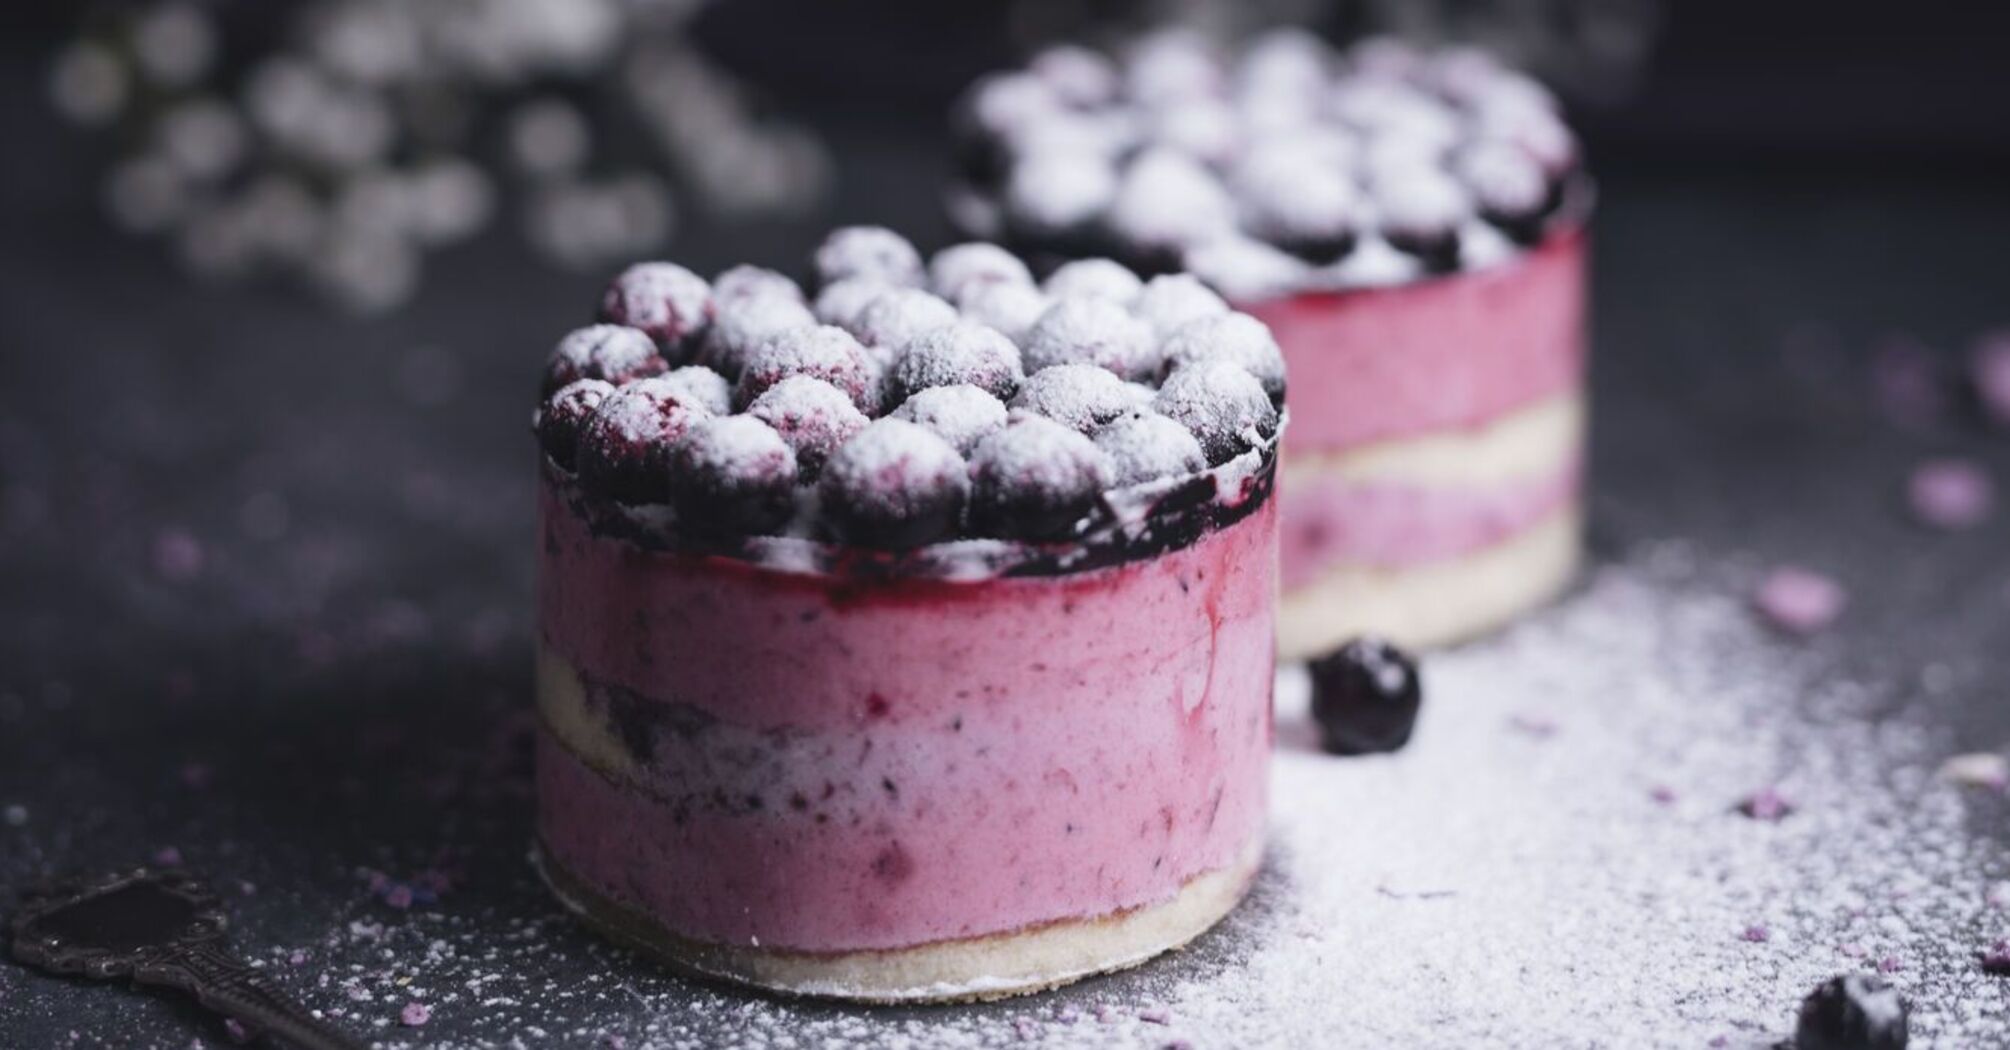 Blueberry cheesecake: you will be delighted with the taste and appearance